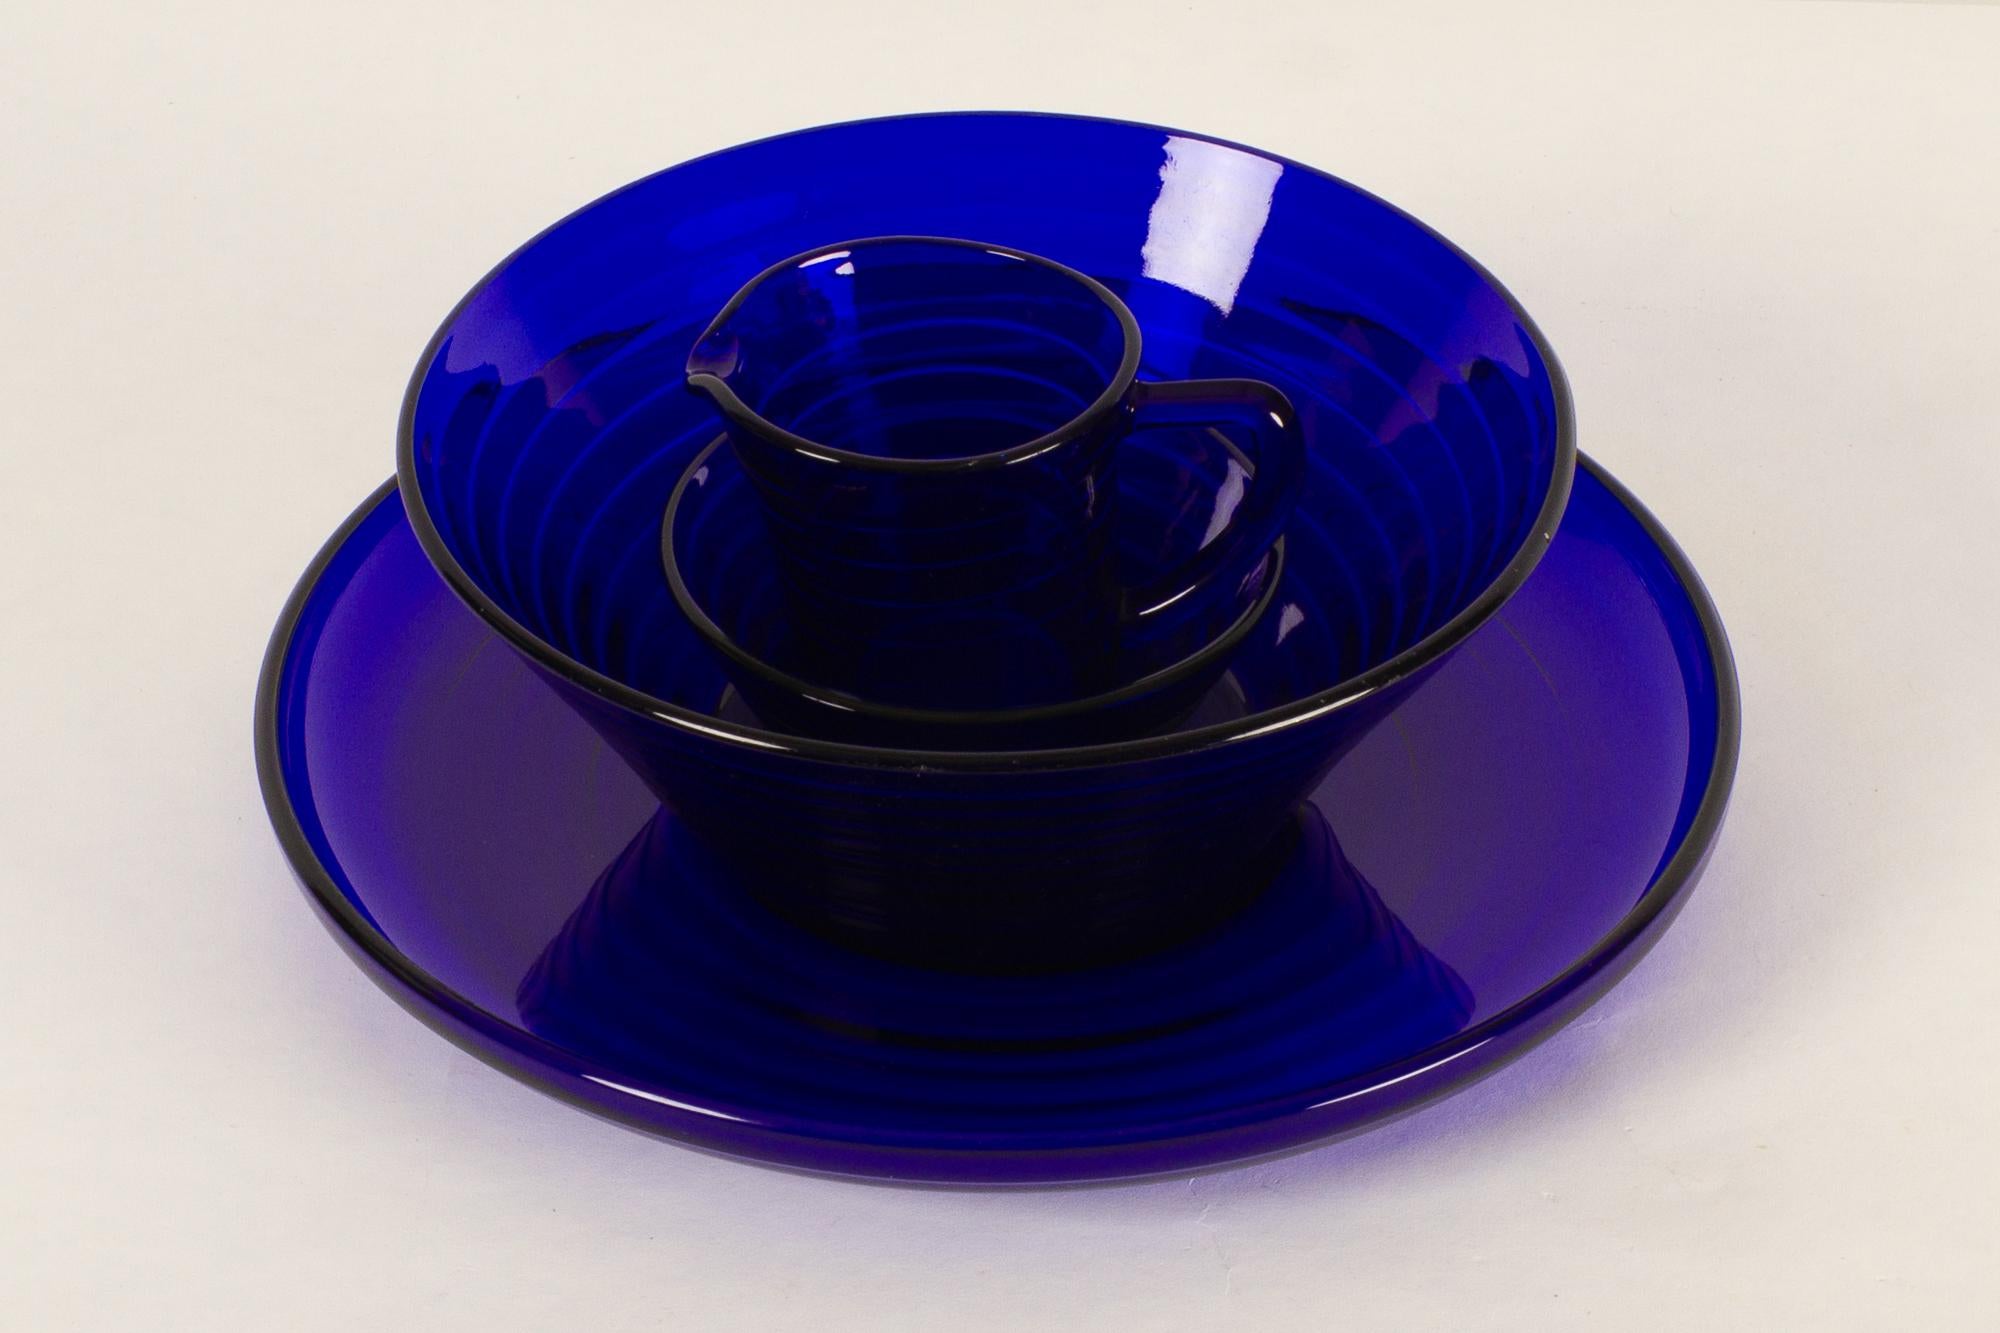 Vintage Danish blue glass set 1930s Set of 4.
Danish blue glass set model Broksø designed by Jacob E. Bang in 1938 for Holmegaard Glassworks in Denmark.
This set consists of:
A small bowl, diameter 11.5 cm.
A small pitcher, height 8.5.
A